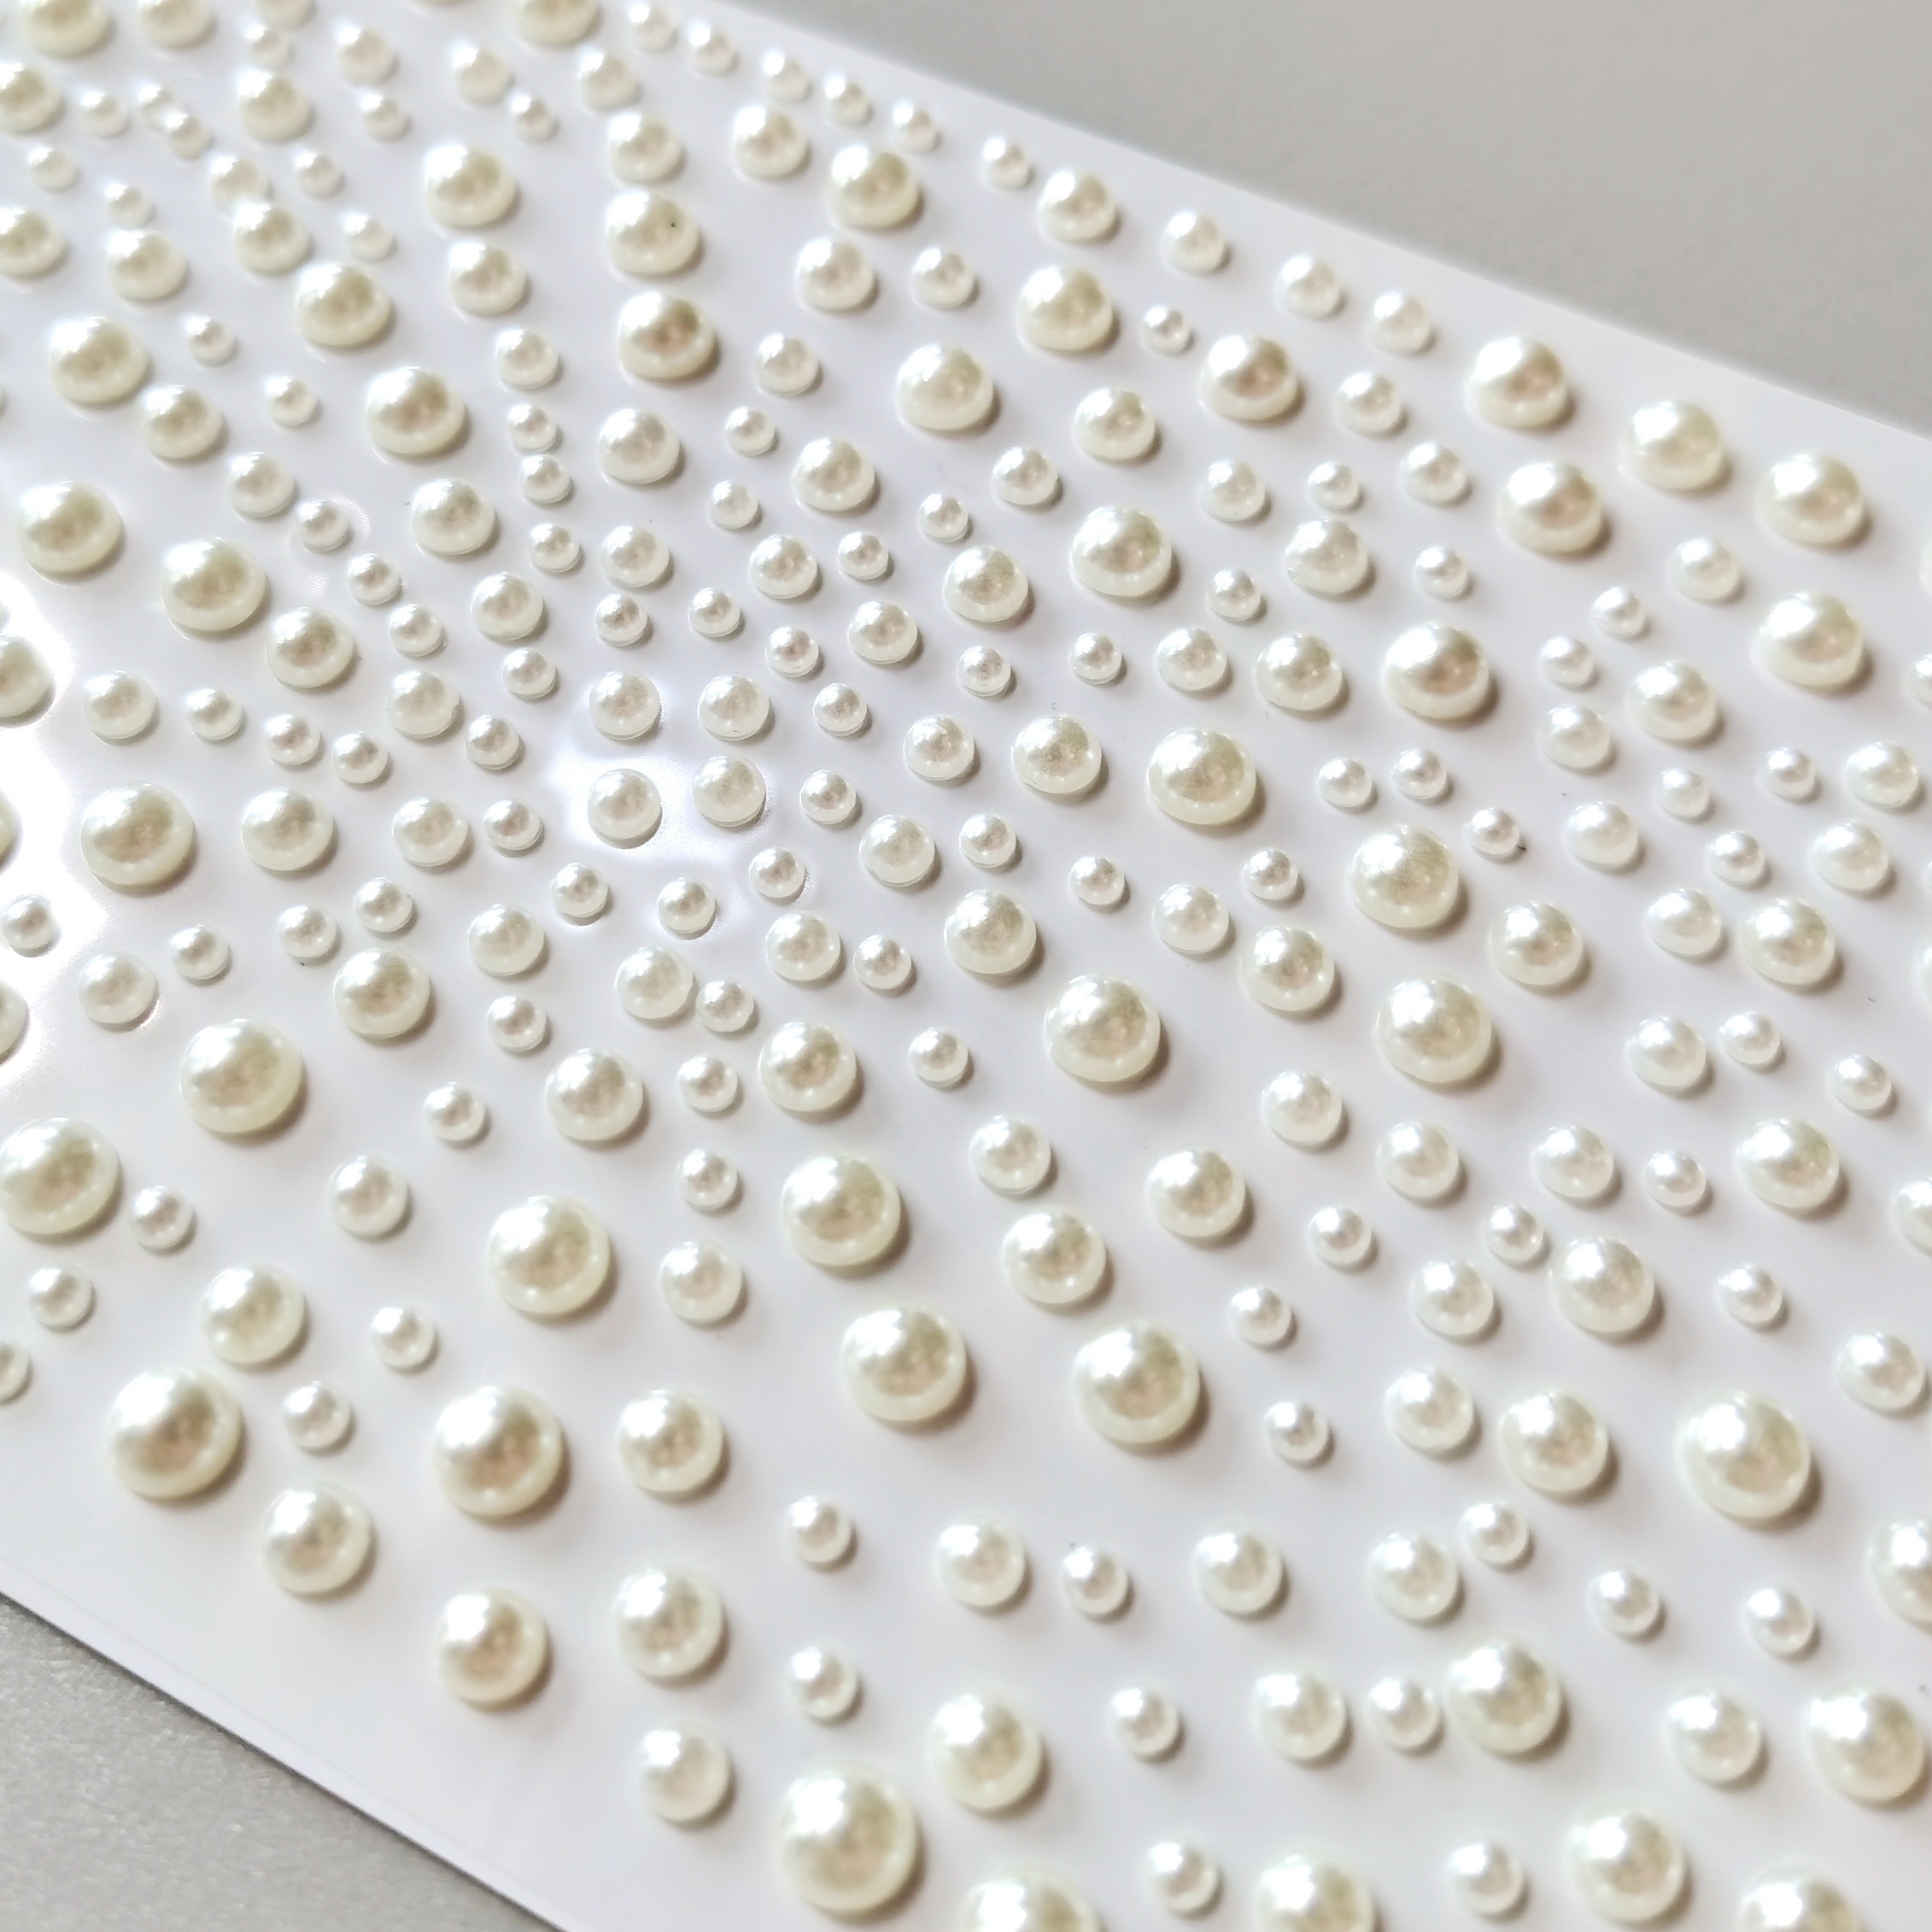 AIEX 3090pcs Pearl Stickers for Crafts, Acrylic Half Round Pearls Stickers,  Self Adhesive Flatback Pearl Sticker Pearl Embellishment Stickers for